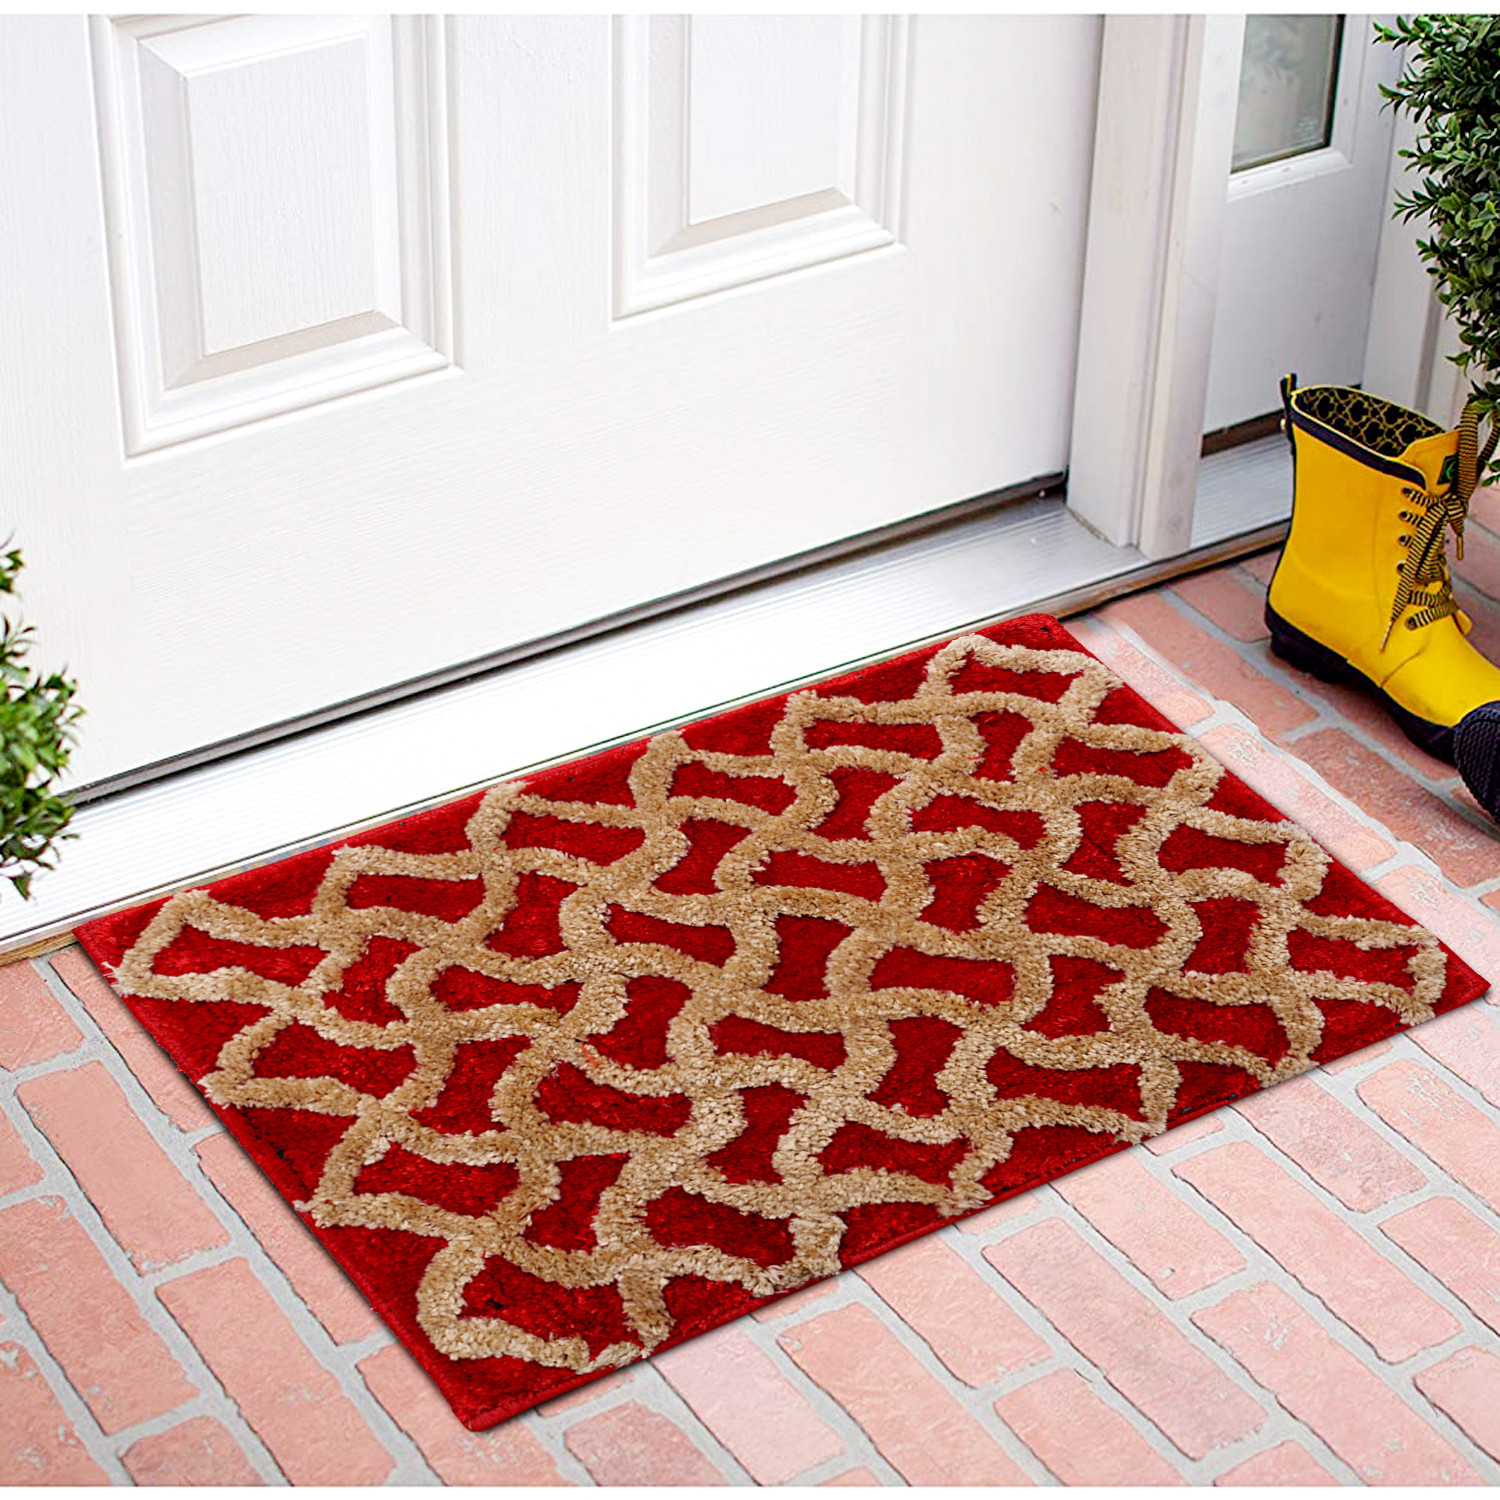 Kuber Industries Soft, lightweigth, Washable, Non Slip Doormat Entrance Rug Dirt Trapper Mat Shoes Scraper for Entry, Patio, Porch- Pack of 3 (Maroon & Grey & Red)